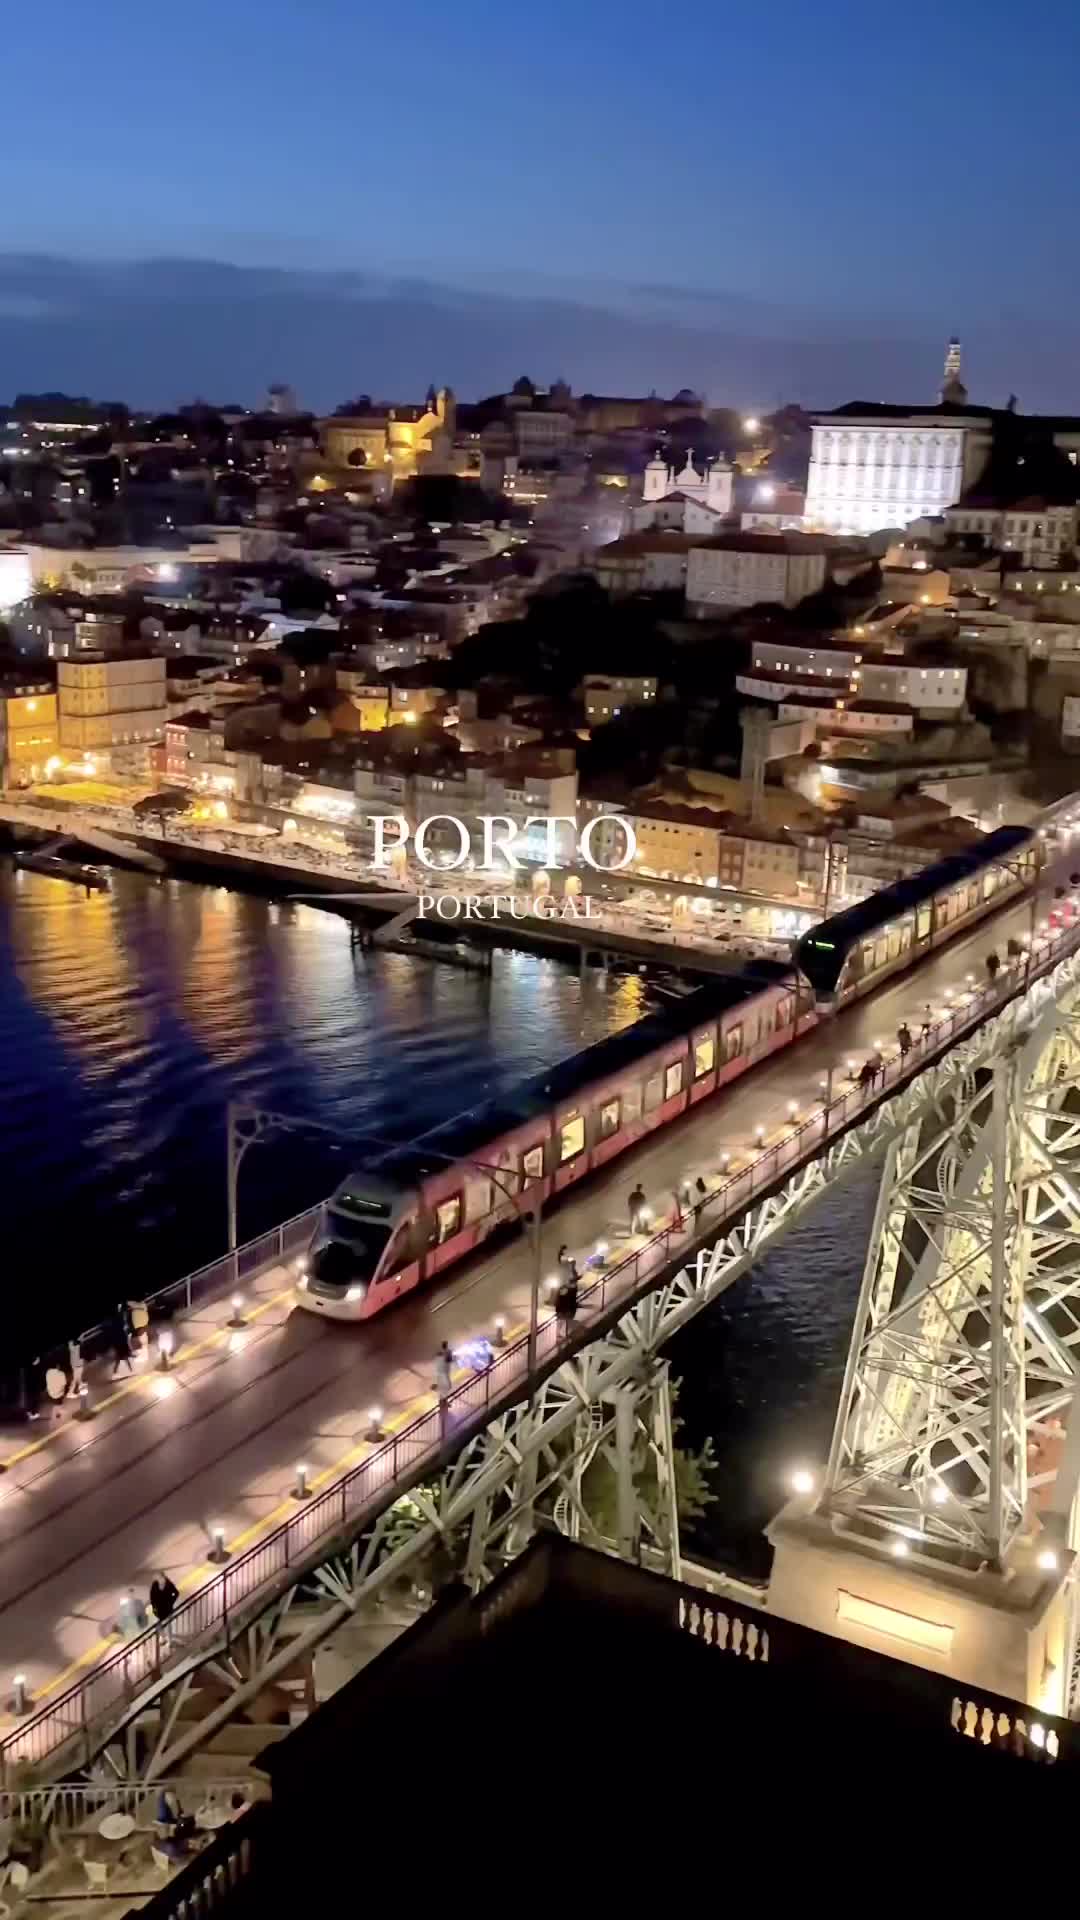 Amazing Porto: A Stunning Evening in Portugal